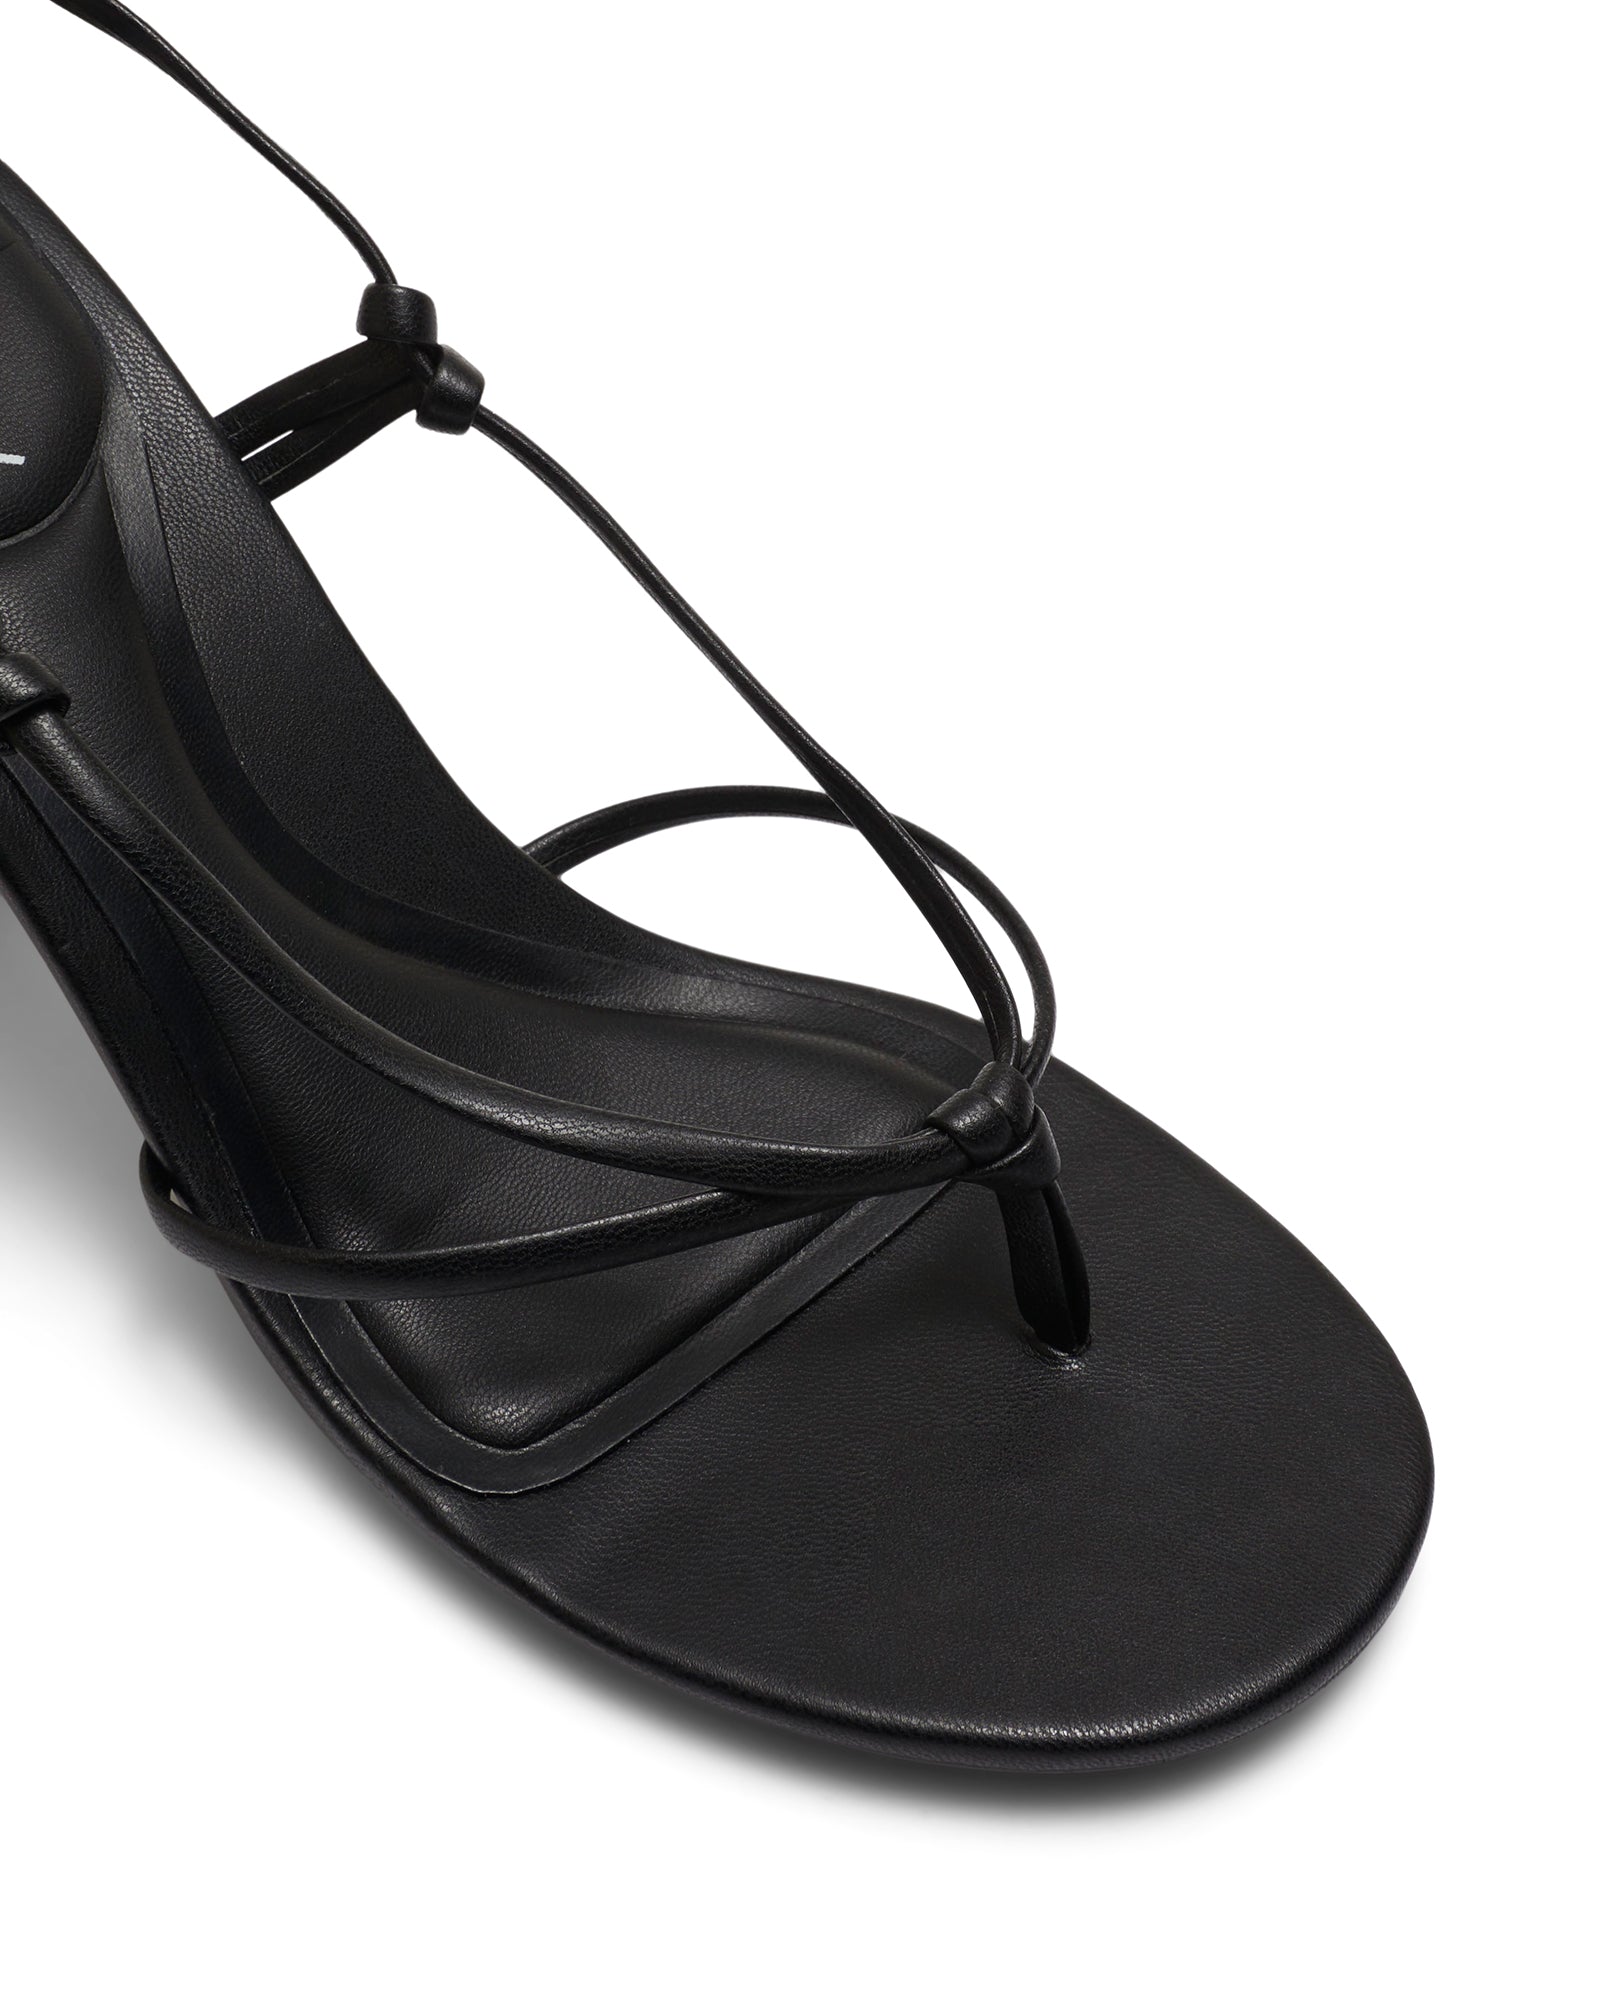 Therapy Shoes Harlow Black | Women's Heels | Sandals | Strappy | Dress